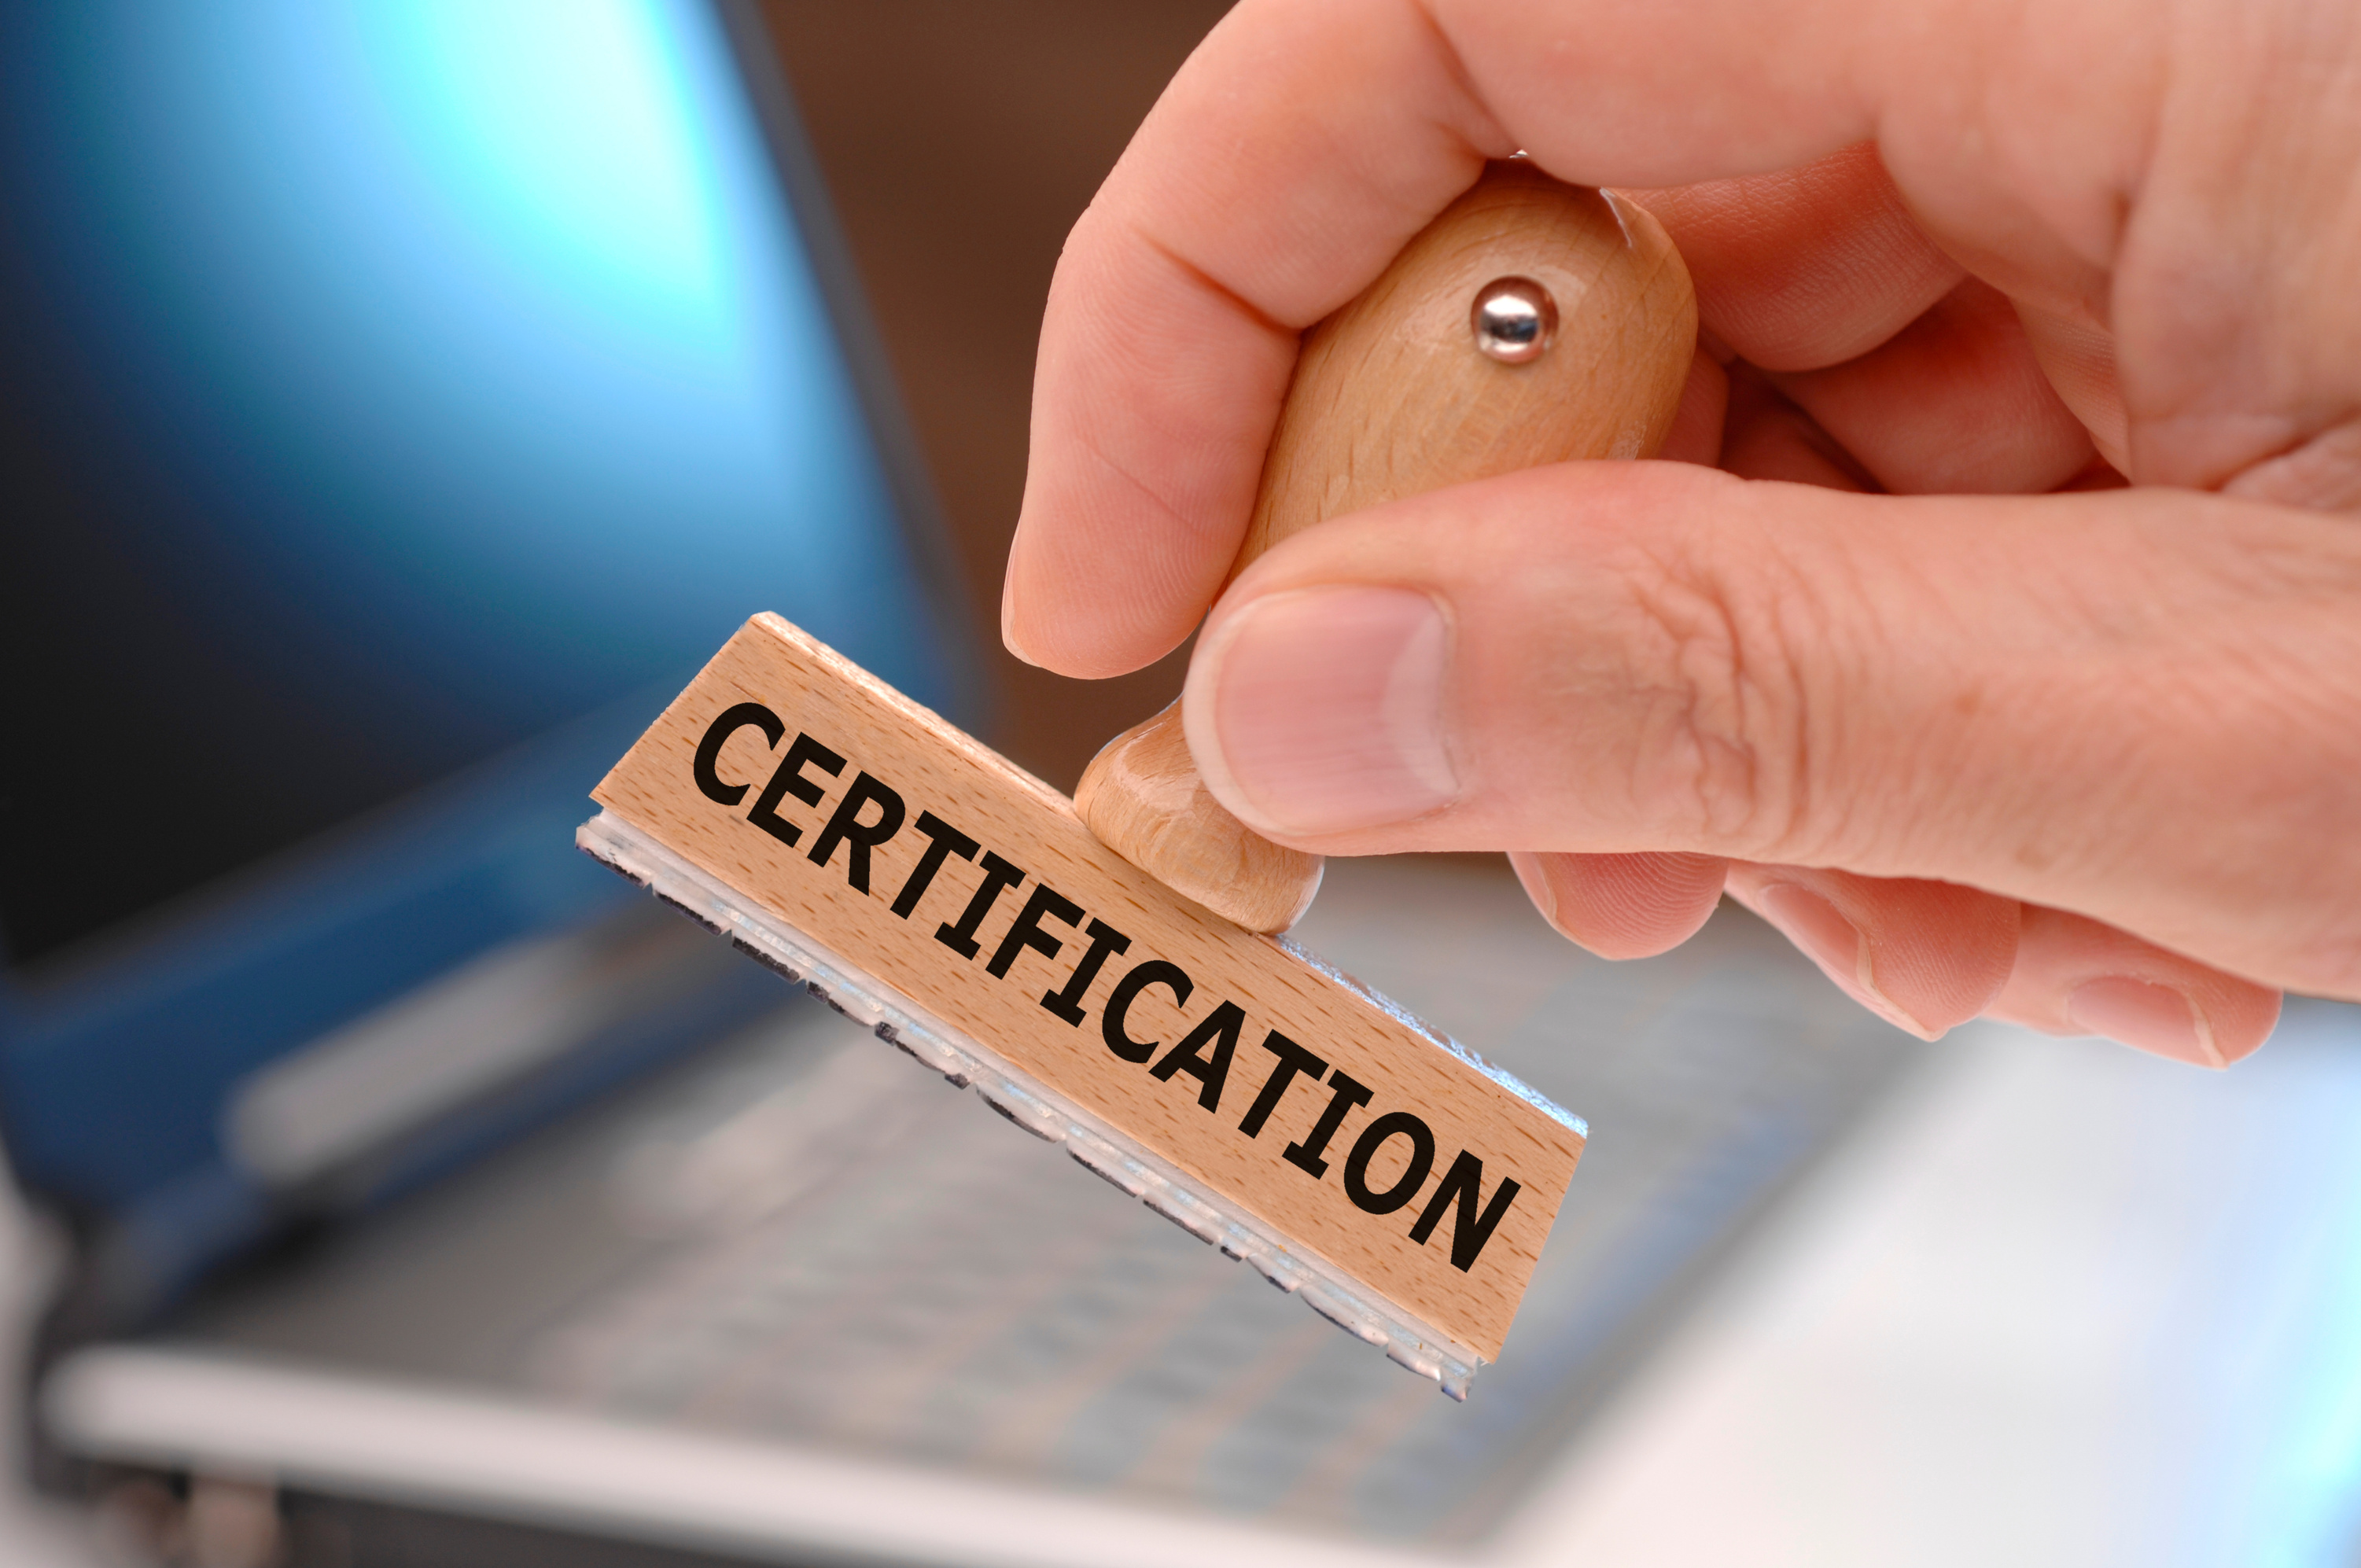 certification printed on rubber stamp in hand